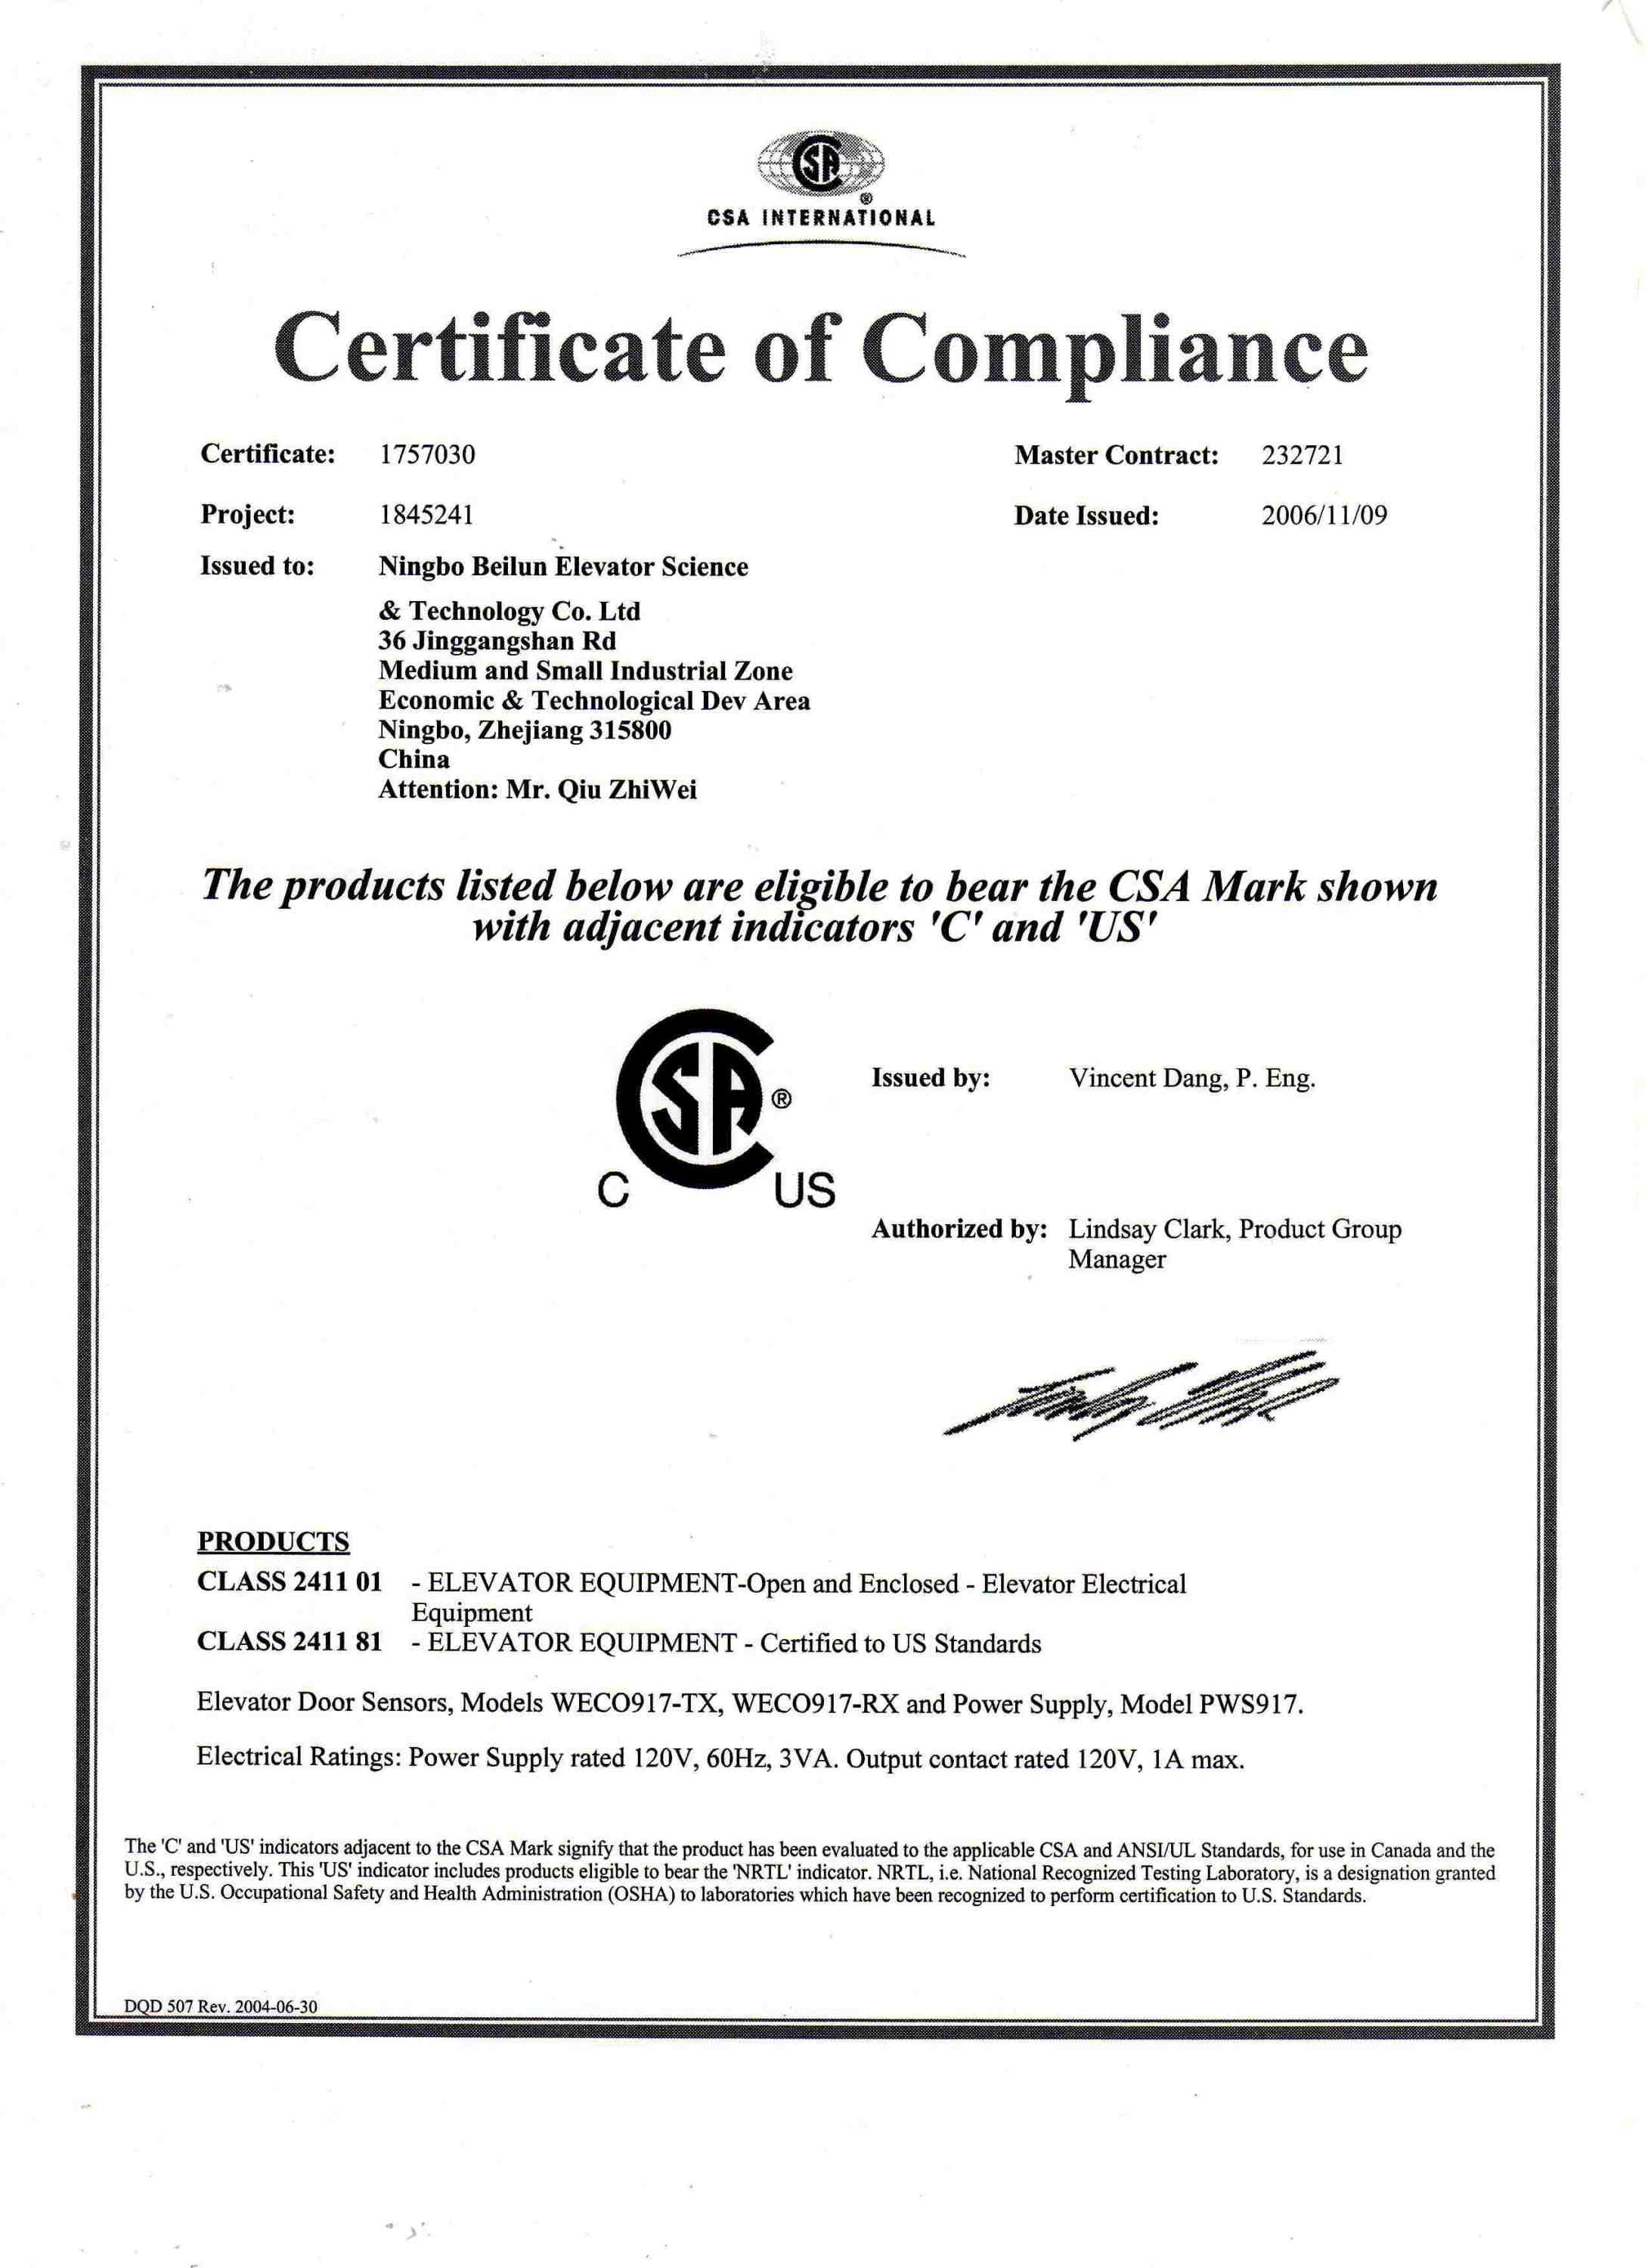 The North American CSA certification Weco optoelectronic Co Ltd